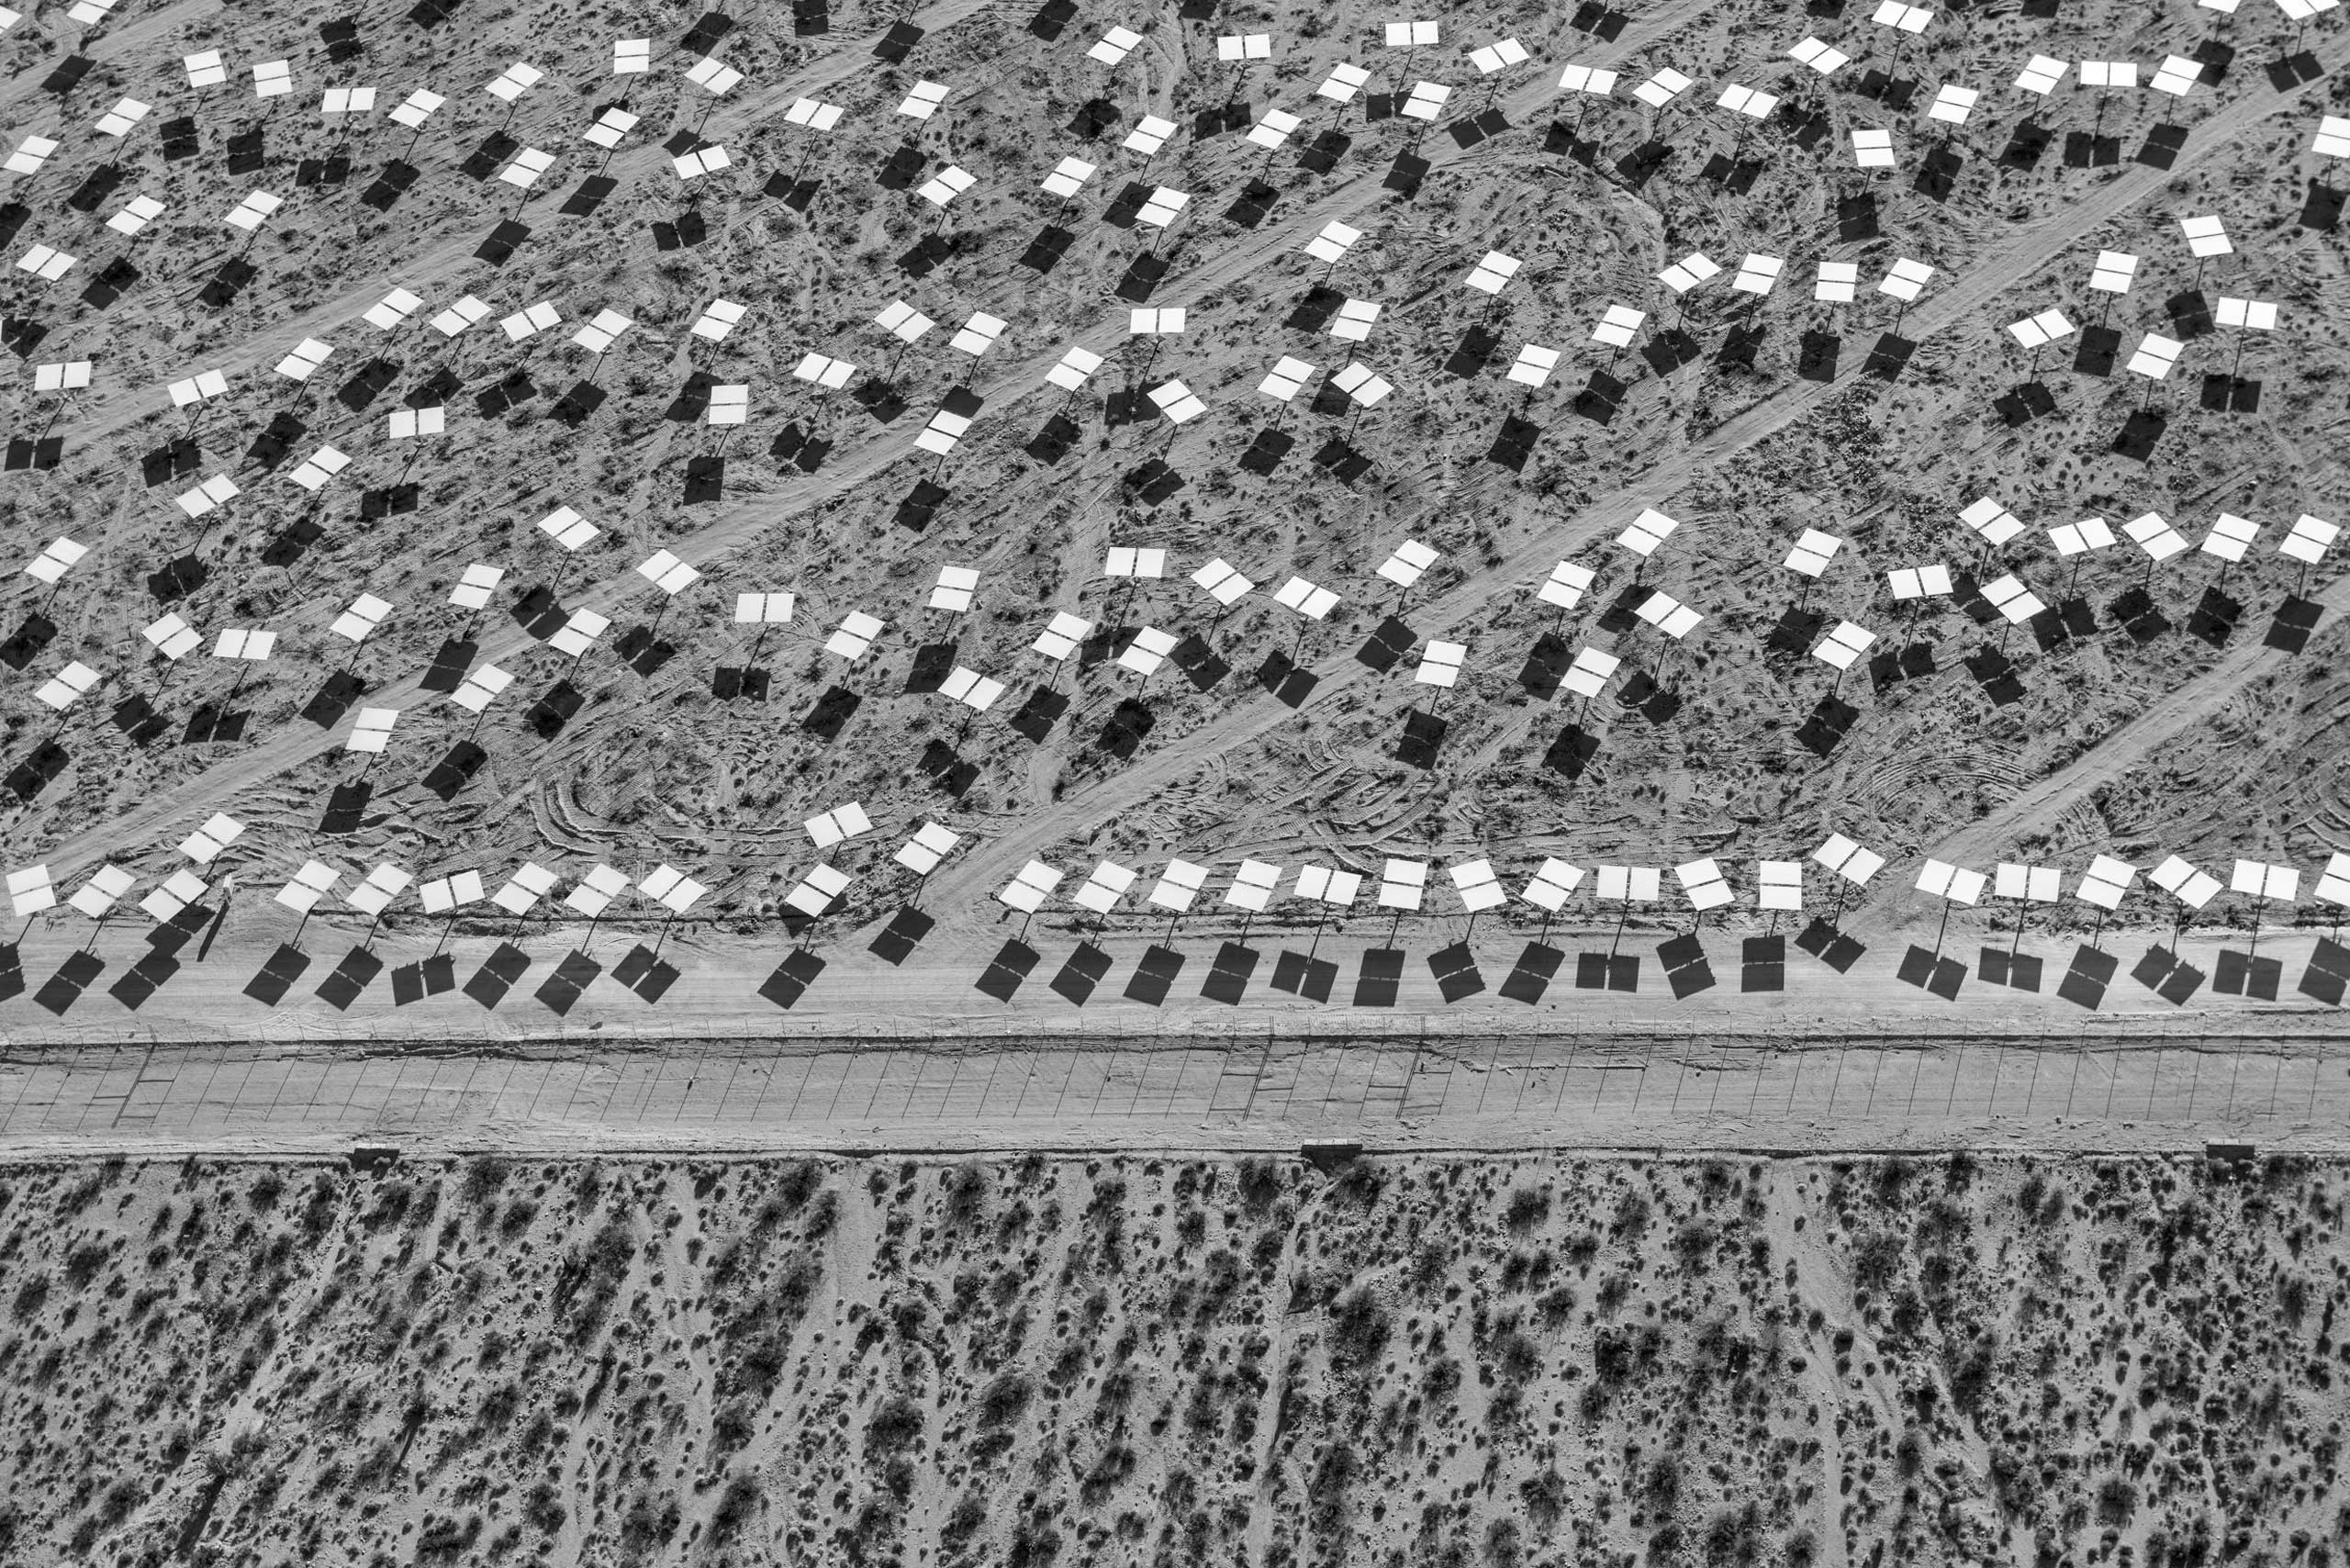 Mirrored heliostats at the Ivanpah solar plant in the Mojave Desert in California.